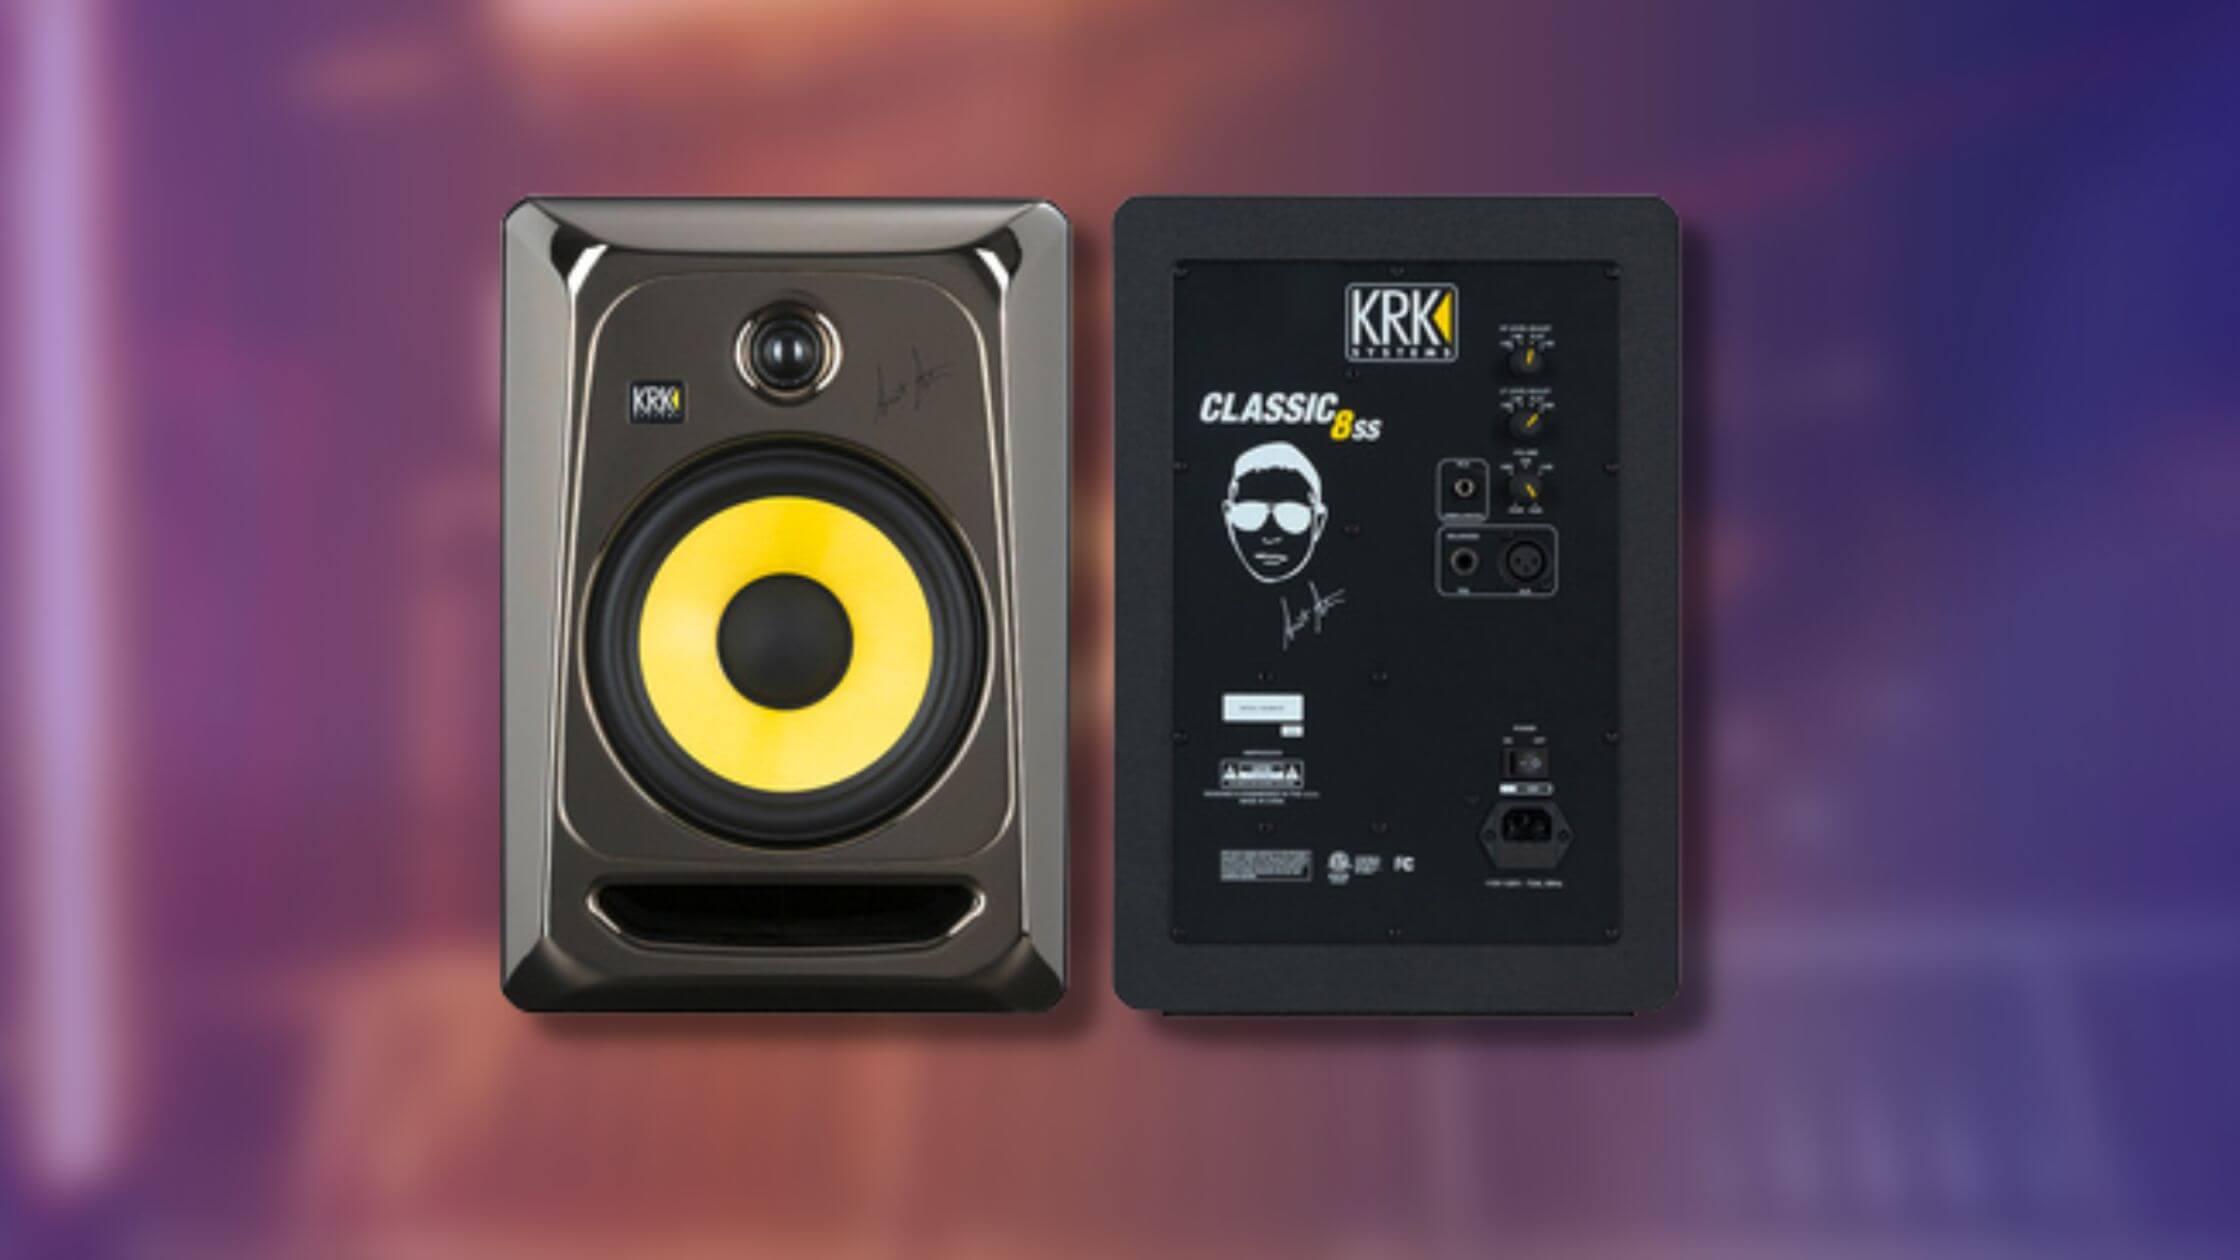 KRK & Dr Dre producer release CLASSIC 8ss studio monitors – limited run of 500